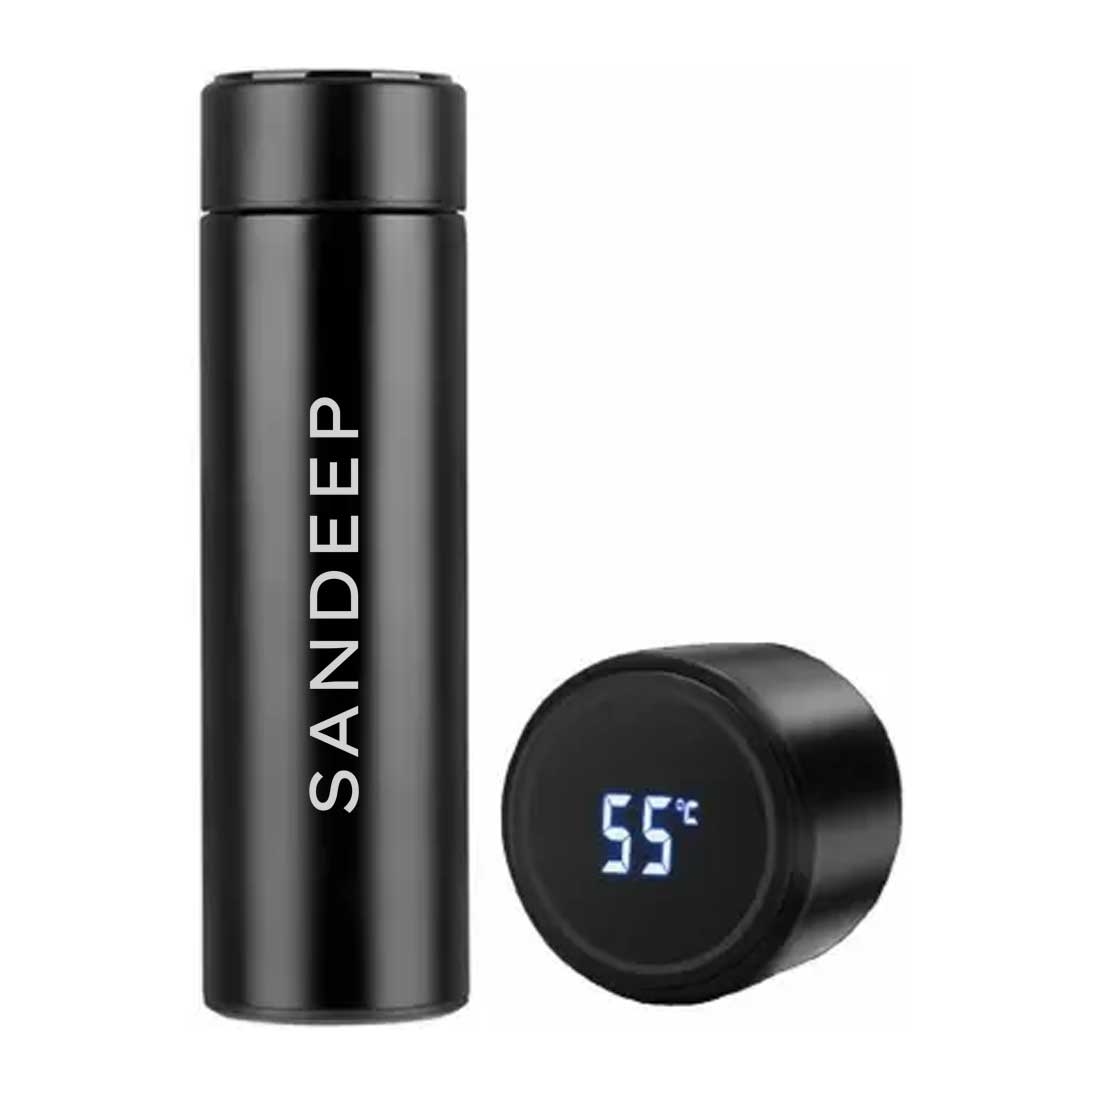 Black Personalised Thermos Chai Flask With Temperature Display - Add Text